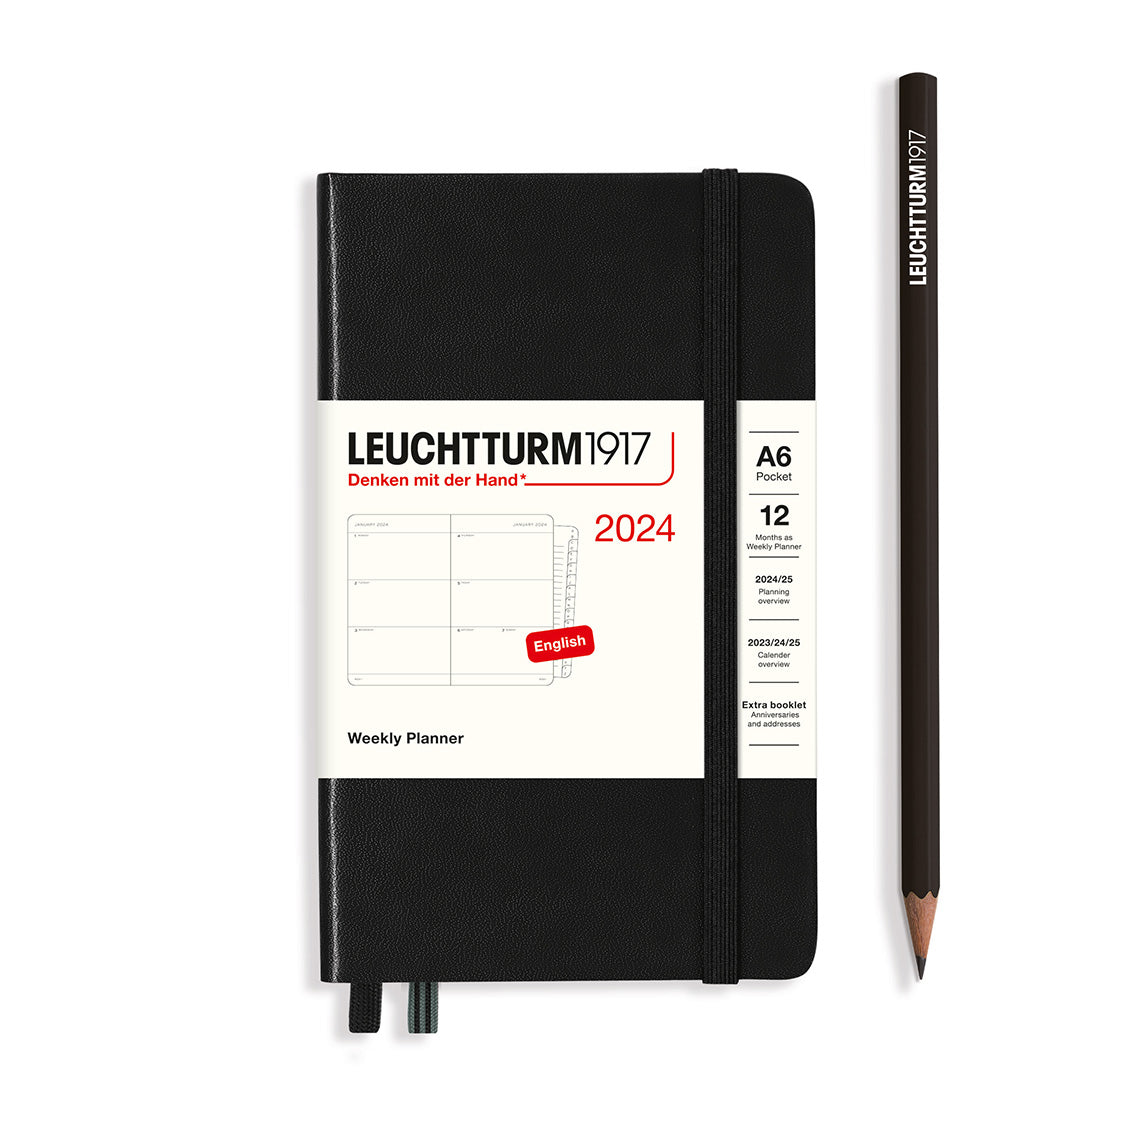 An image of a black planner with a black elastic band holding it together and a cream paper wrap around the middle stating the business name Leuchtturm1917, that it is for the year 2024, it is a weekly planner, is A6 in size and an English language version. It has an image on the wrap showing the inside layout which is a week spread across 2 pages. A black pencil is shown at the side of the planner.